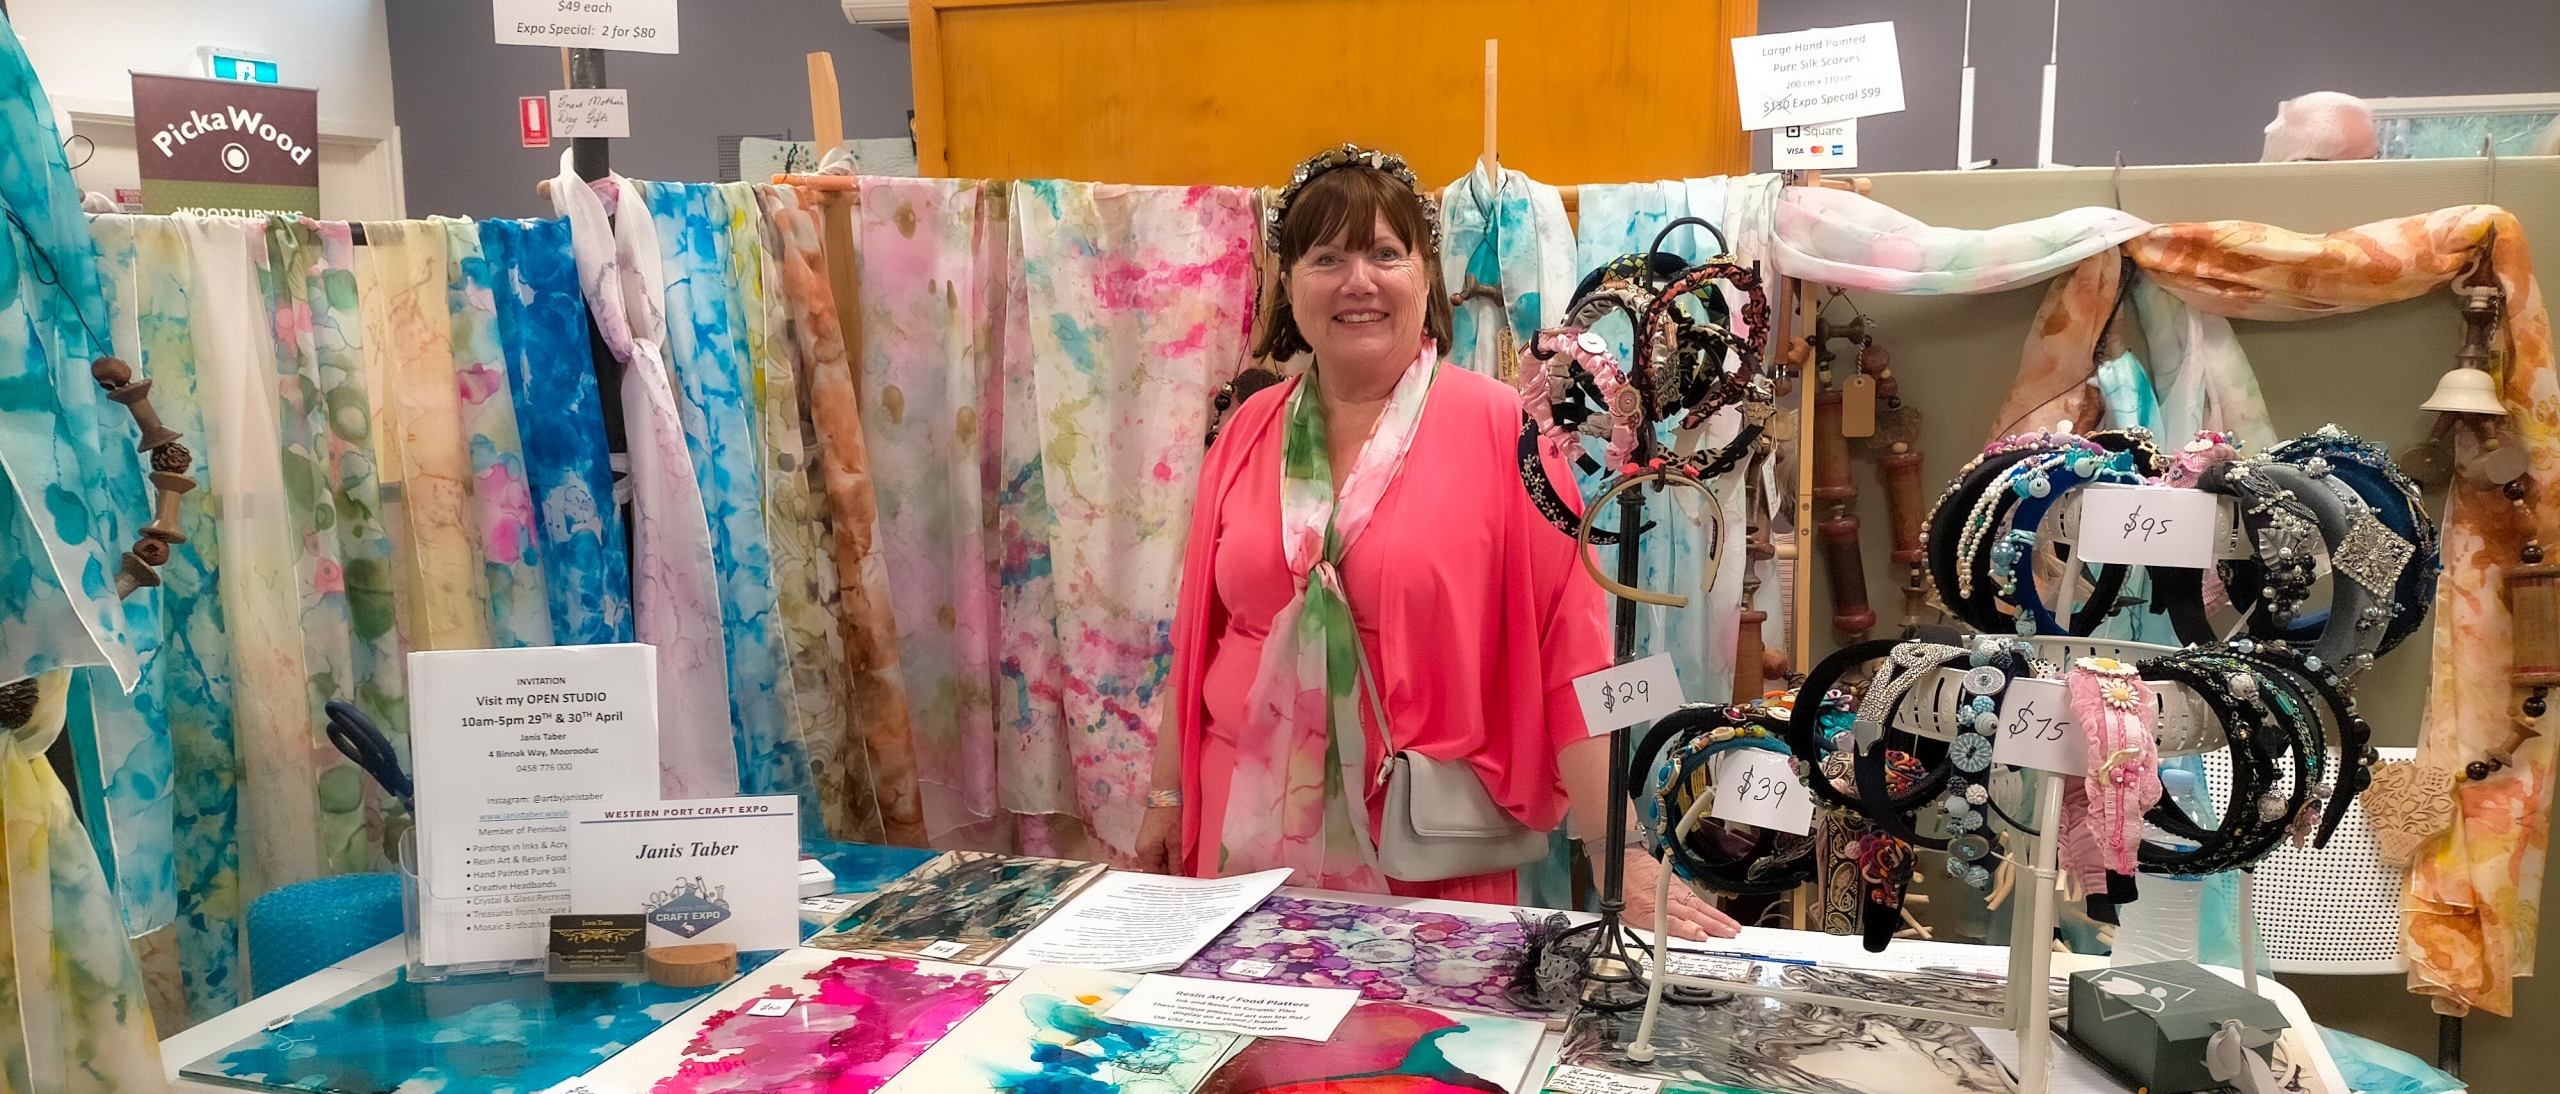 Jan Barbieri from the Peninsula Arts Textile Group, at Hastings Craft Expo, with hand crafted scarves, prints and accessories